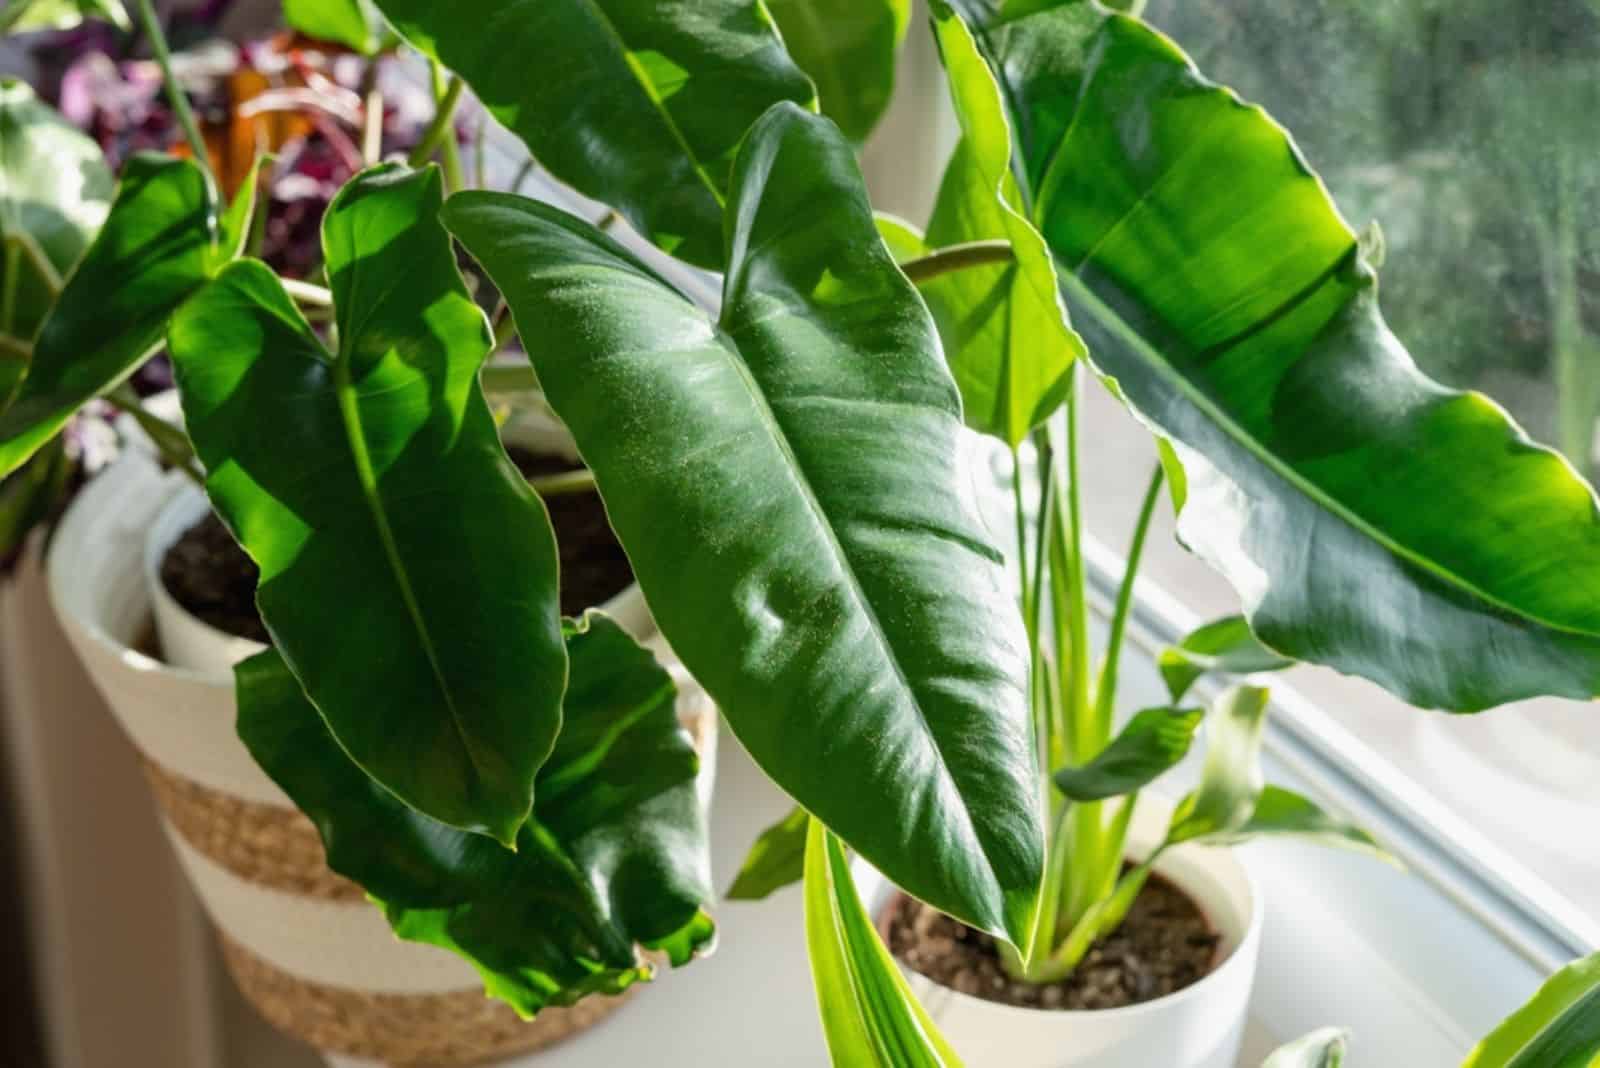 philodendron Burle Marx with curly green leaves stands next to window